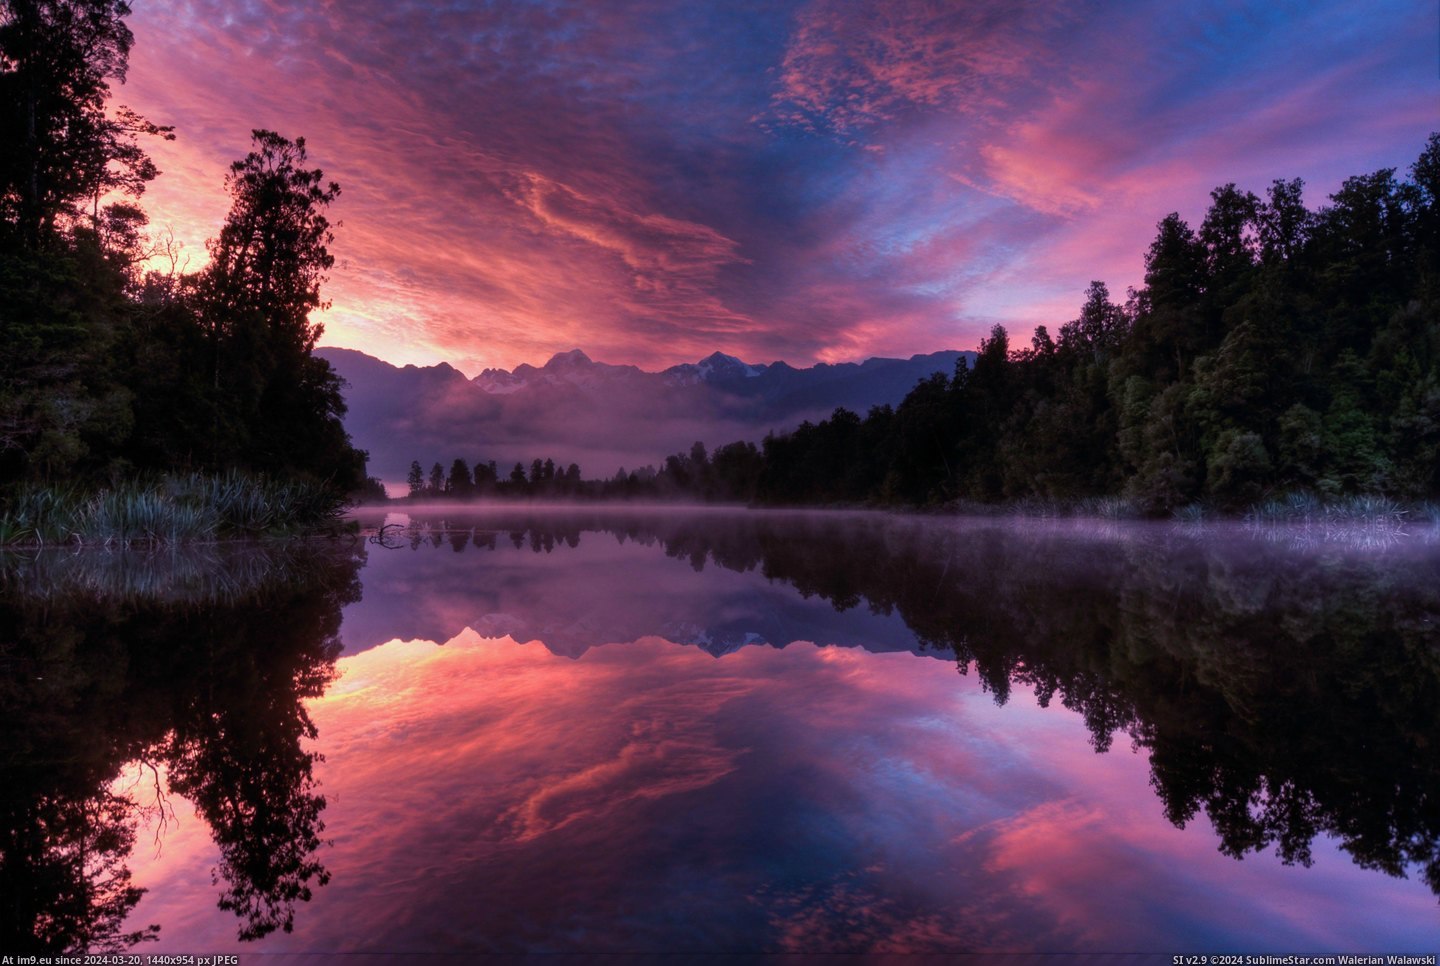 #One #Photos #Lake #Glacier #Mentioned #Fox #Zealand #Sunrise [Earthporn] Someone mentioned we need more New Zealand photos, so here's one I took at Lake Matheson near Fox Glacier at sunrise Pic. (Изображение из альбом My r/EARTHPORN favs))